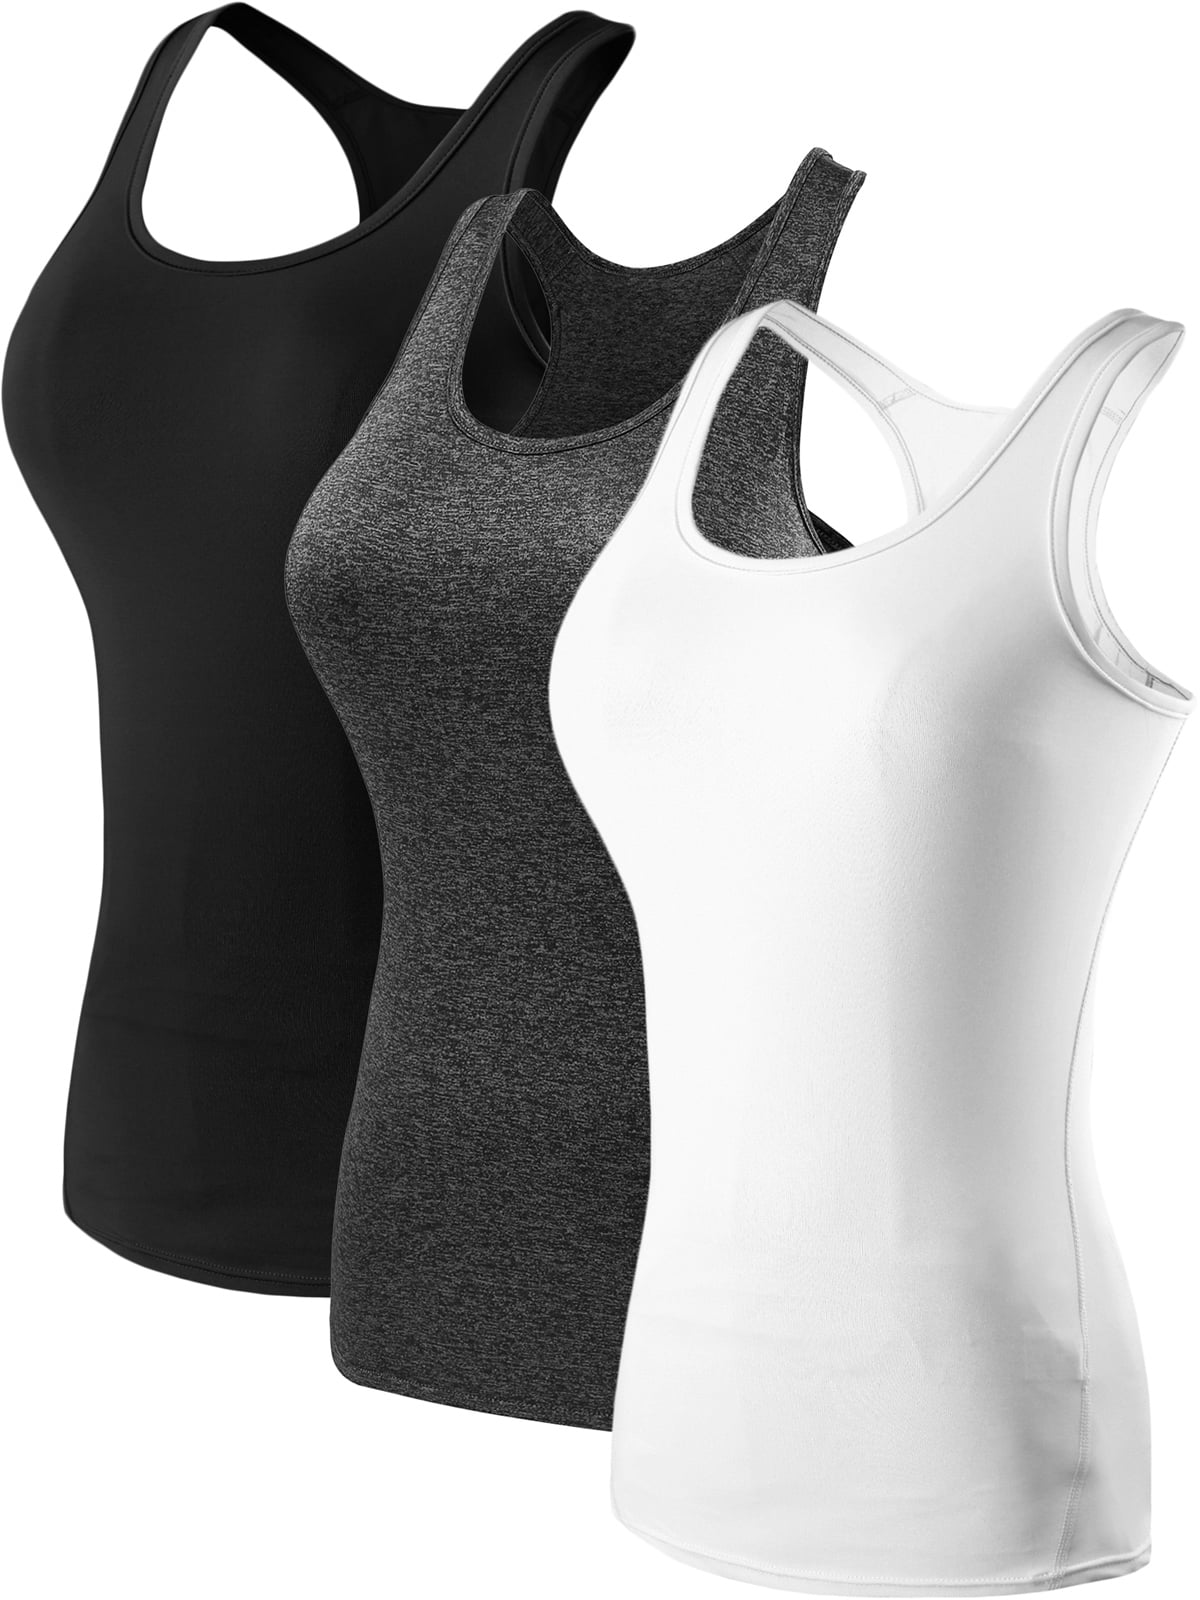 NELEUS Womens Compression Base Layer Dry Fit Tank Top 3  Pack,Black+Gray+White,US Size XS